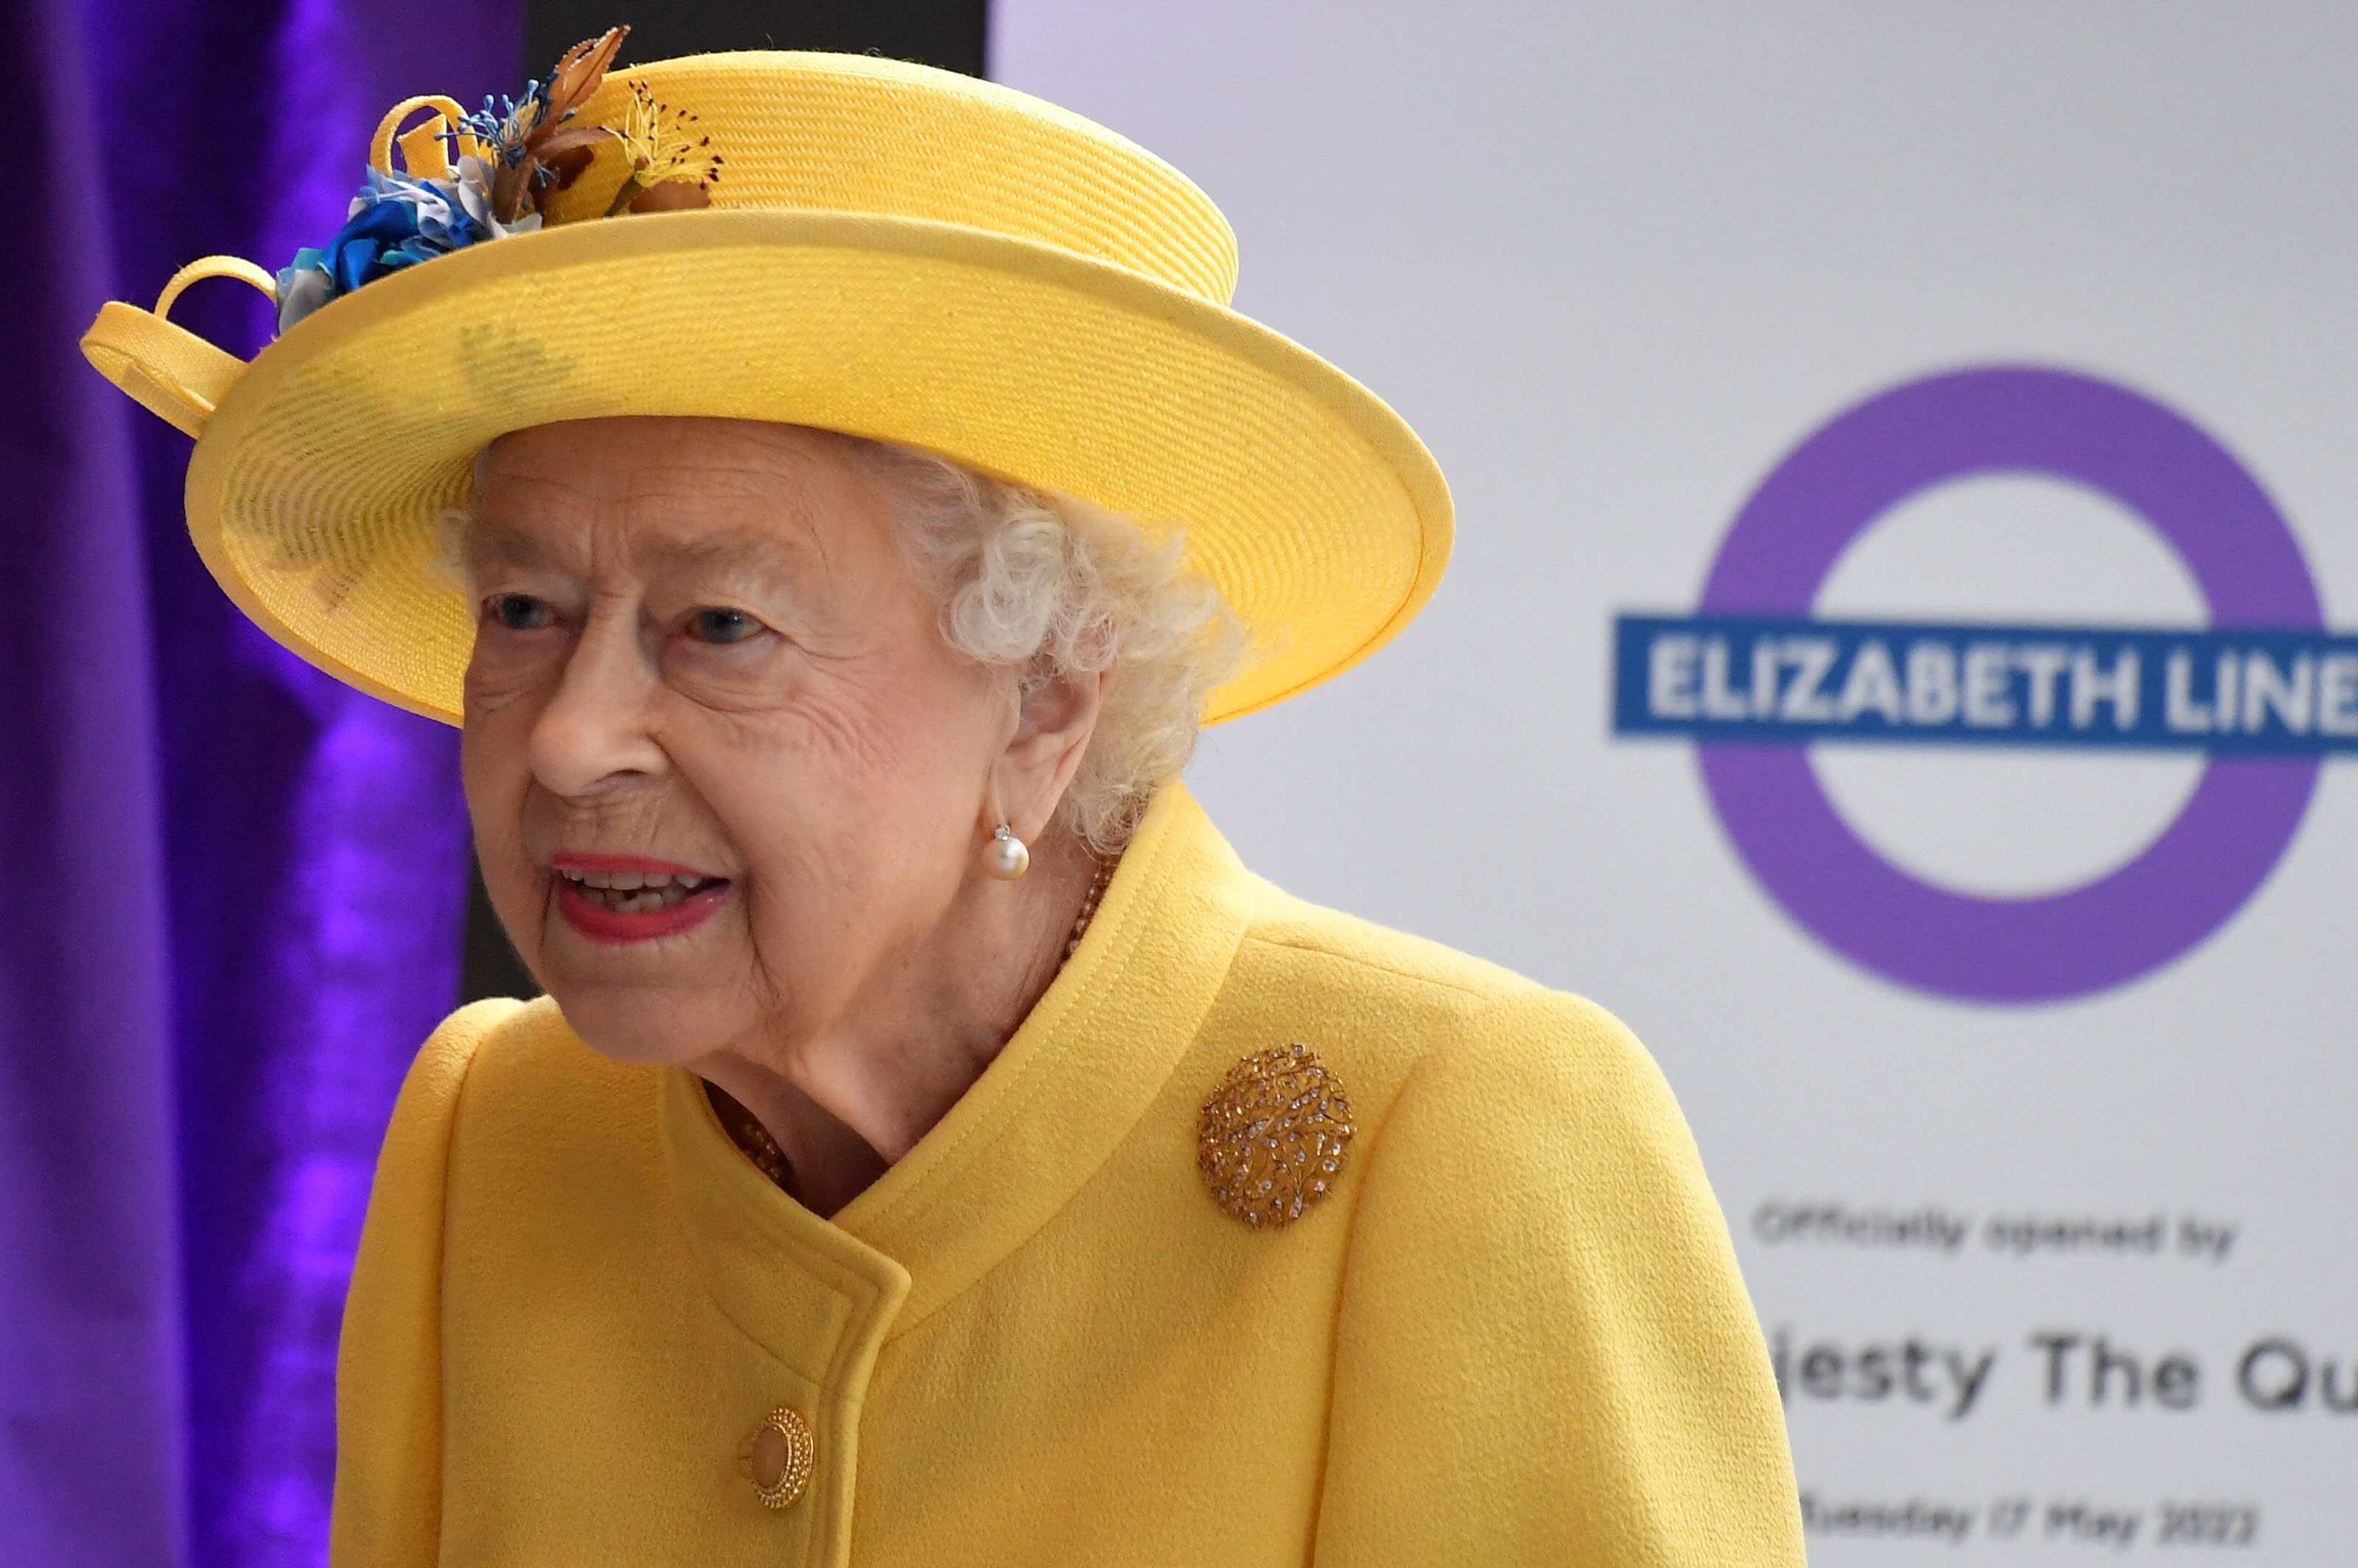 Britain’s Queen Elizabeth is seen wearing the "bird of paradise" brooch during an event to mark the completion of the Elizabeth Line at Paddington Station in London, Britain on May 17, 2022.